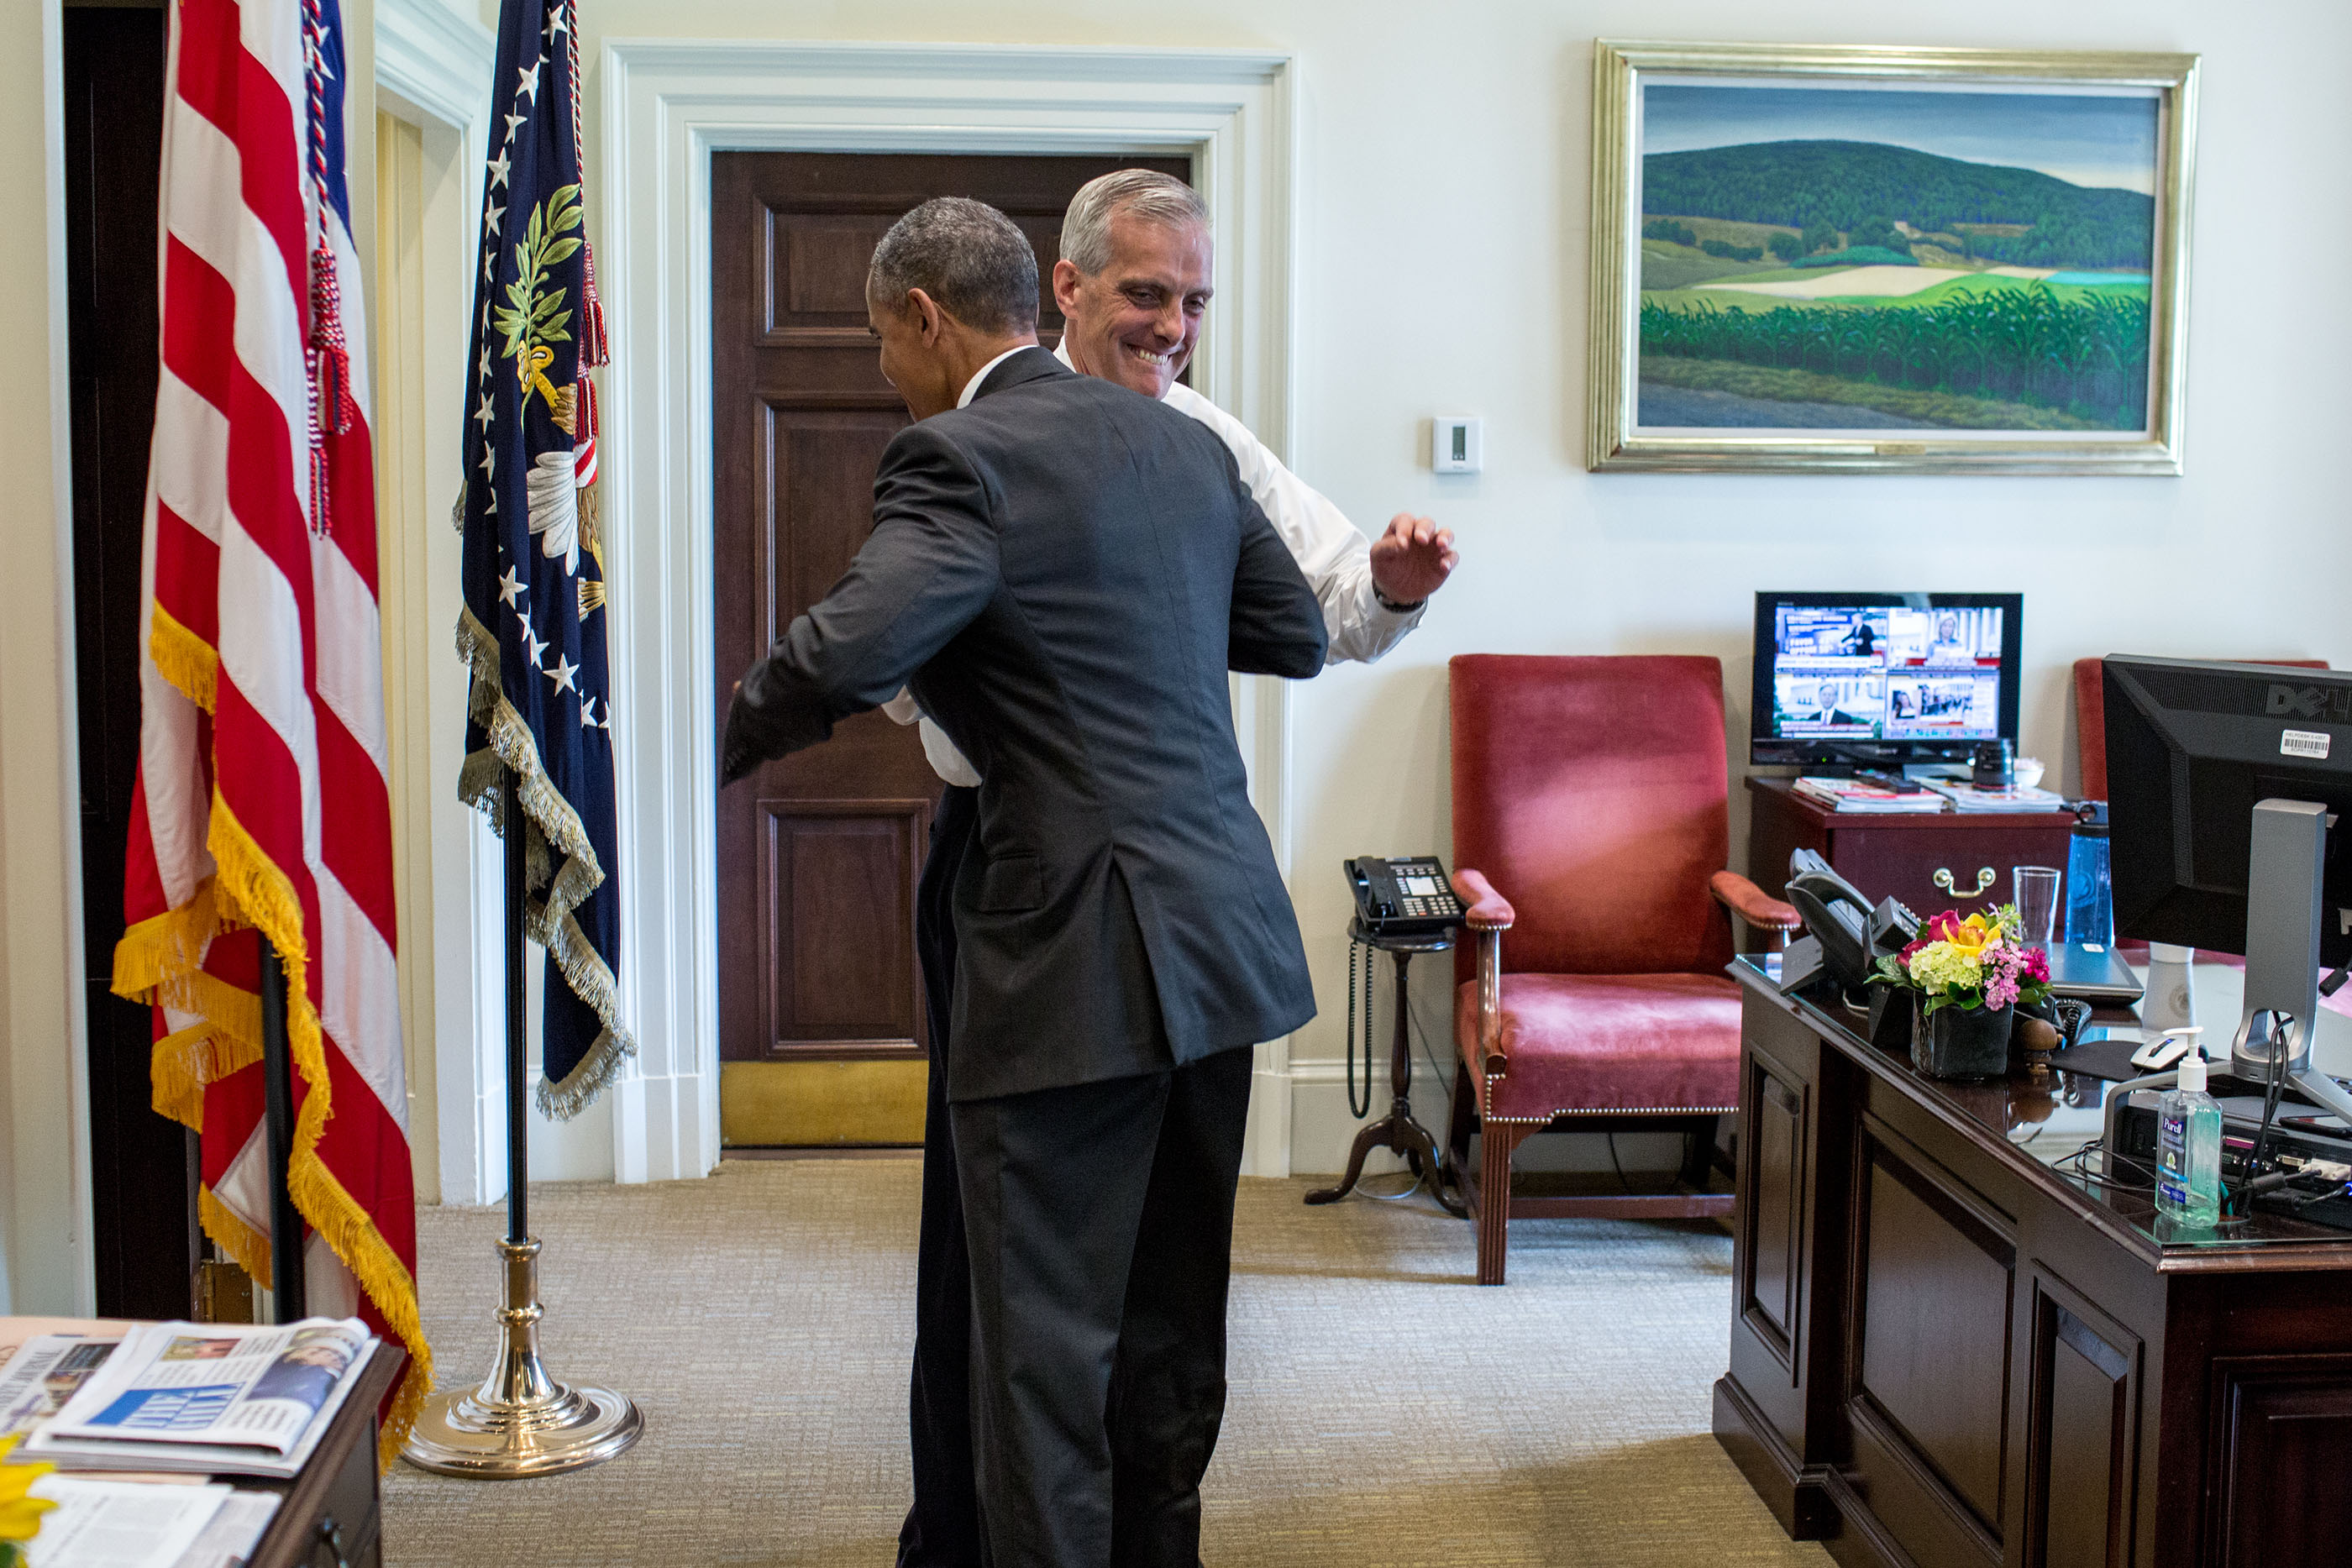 President Obama Hears the News on the Affordable Care Act Supreme Court